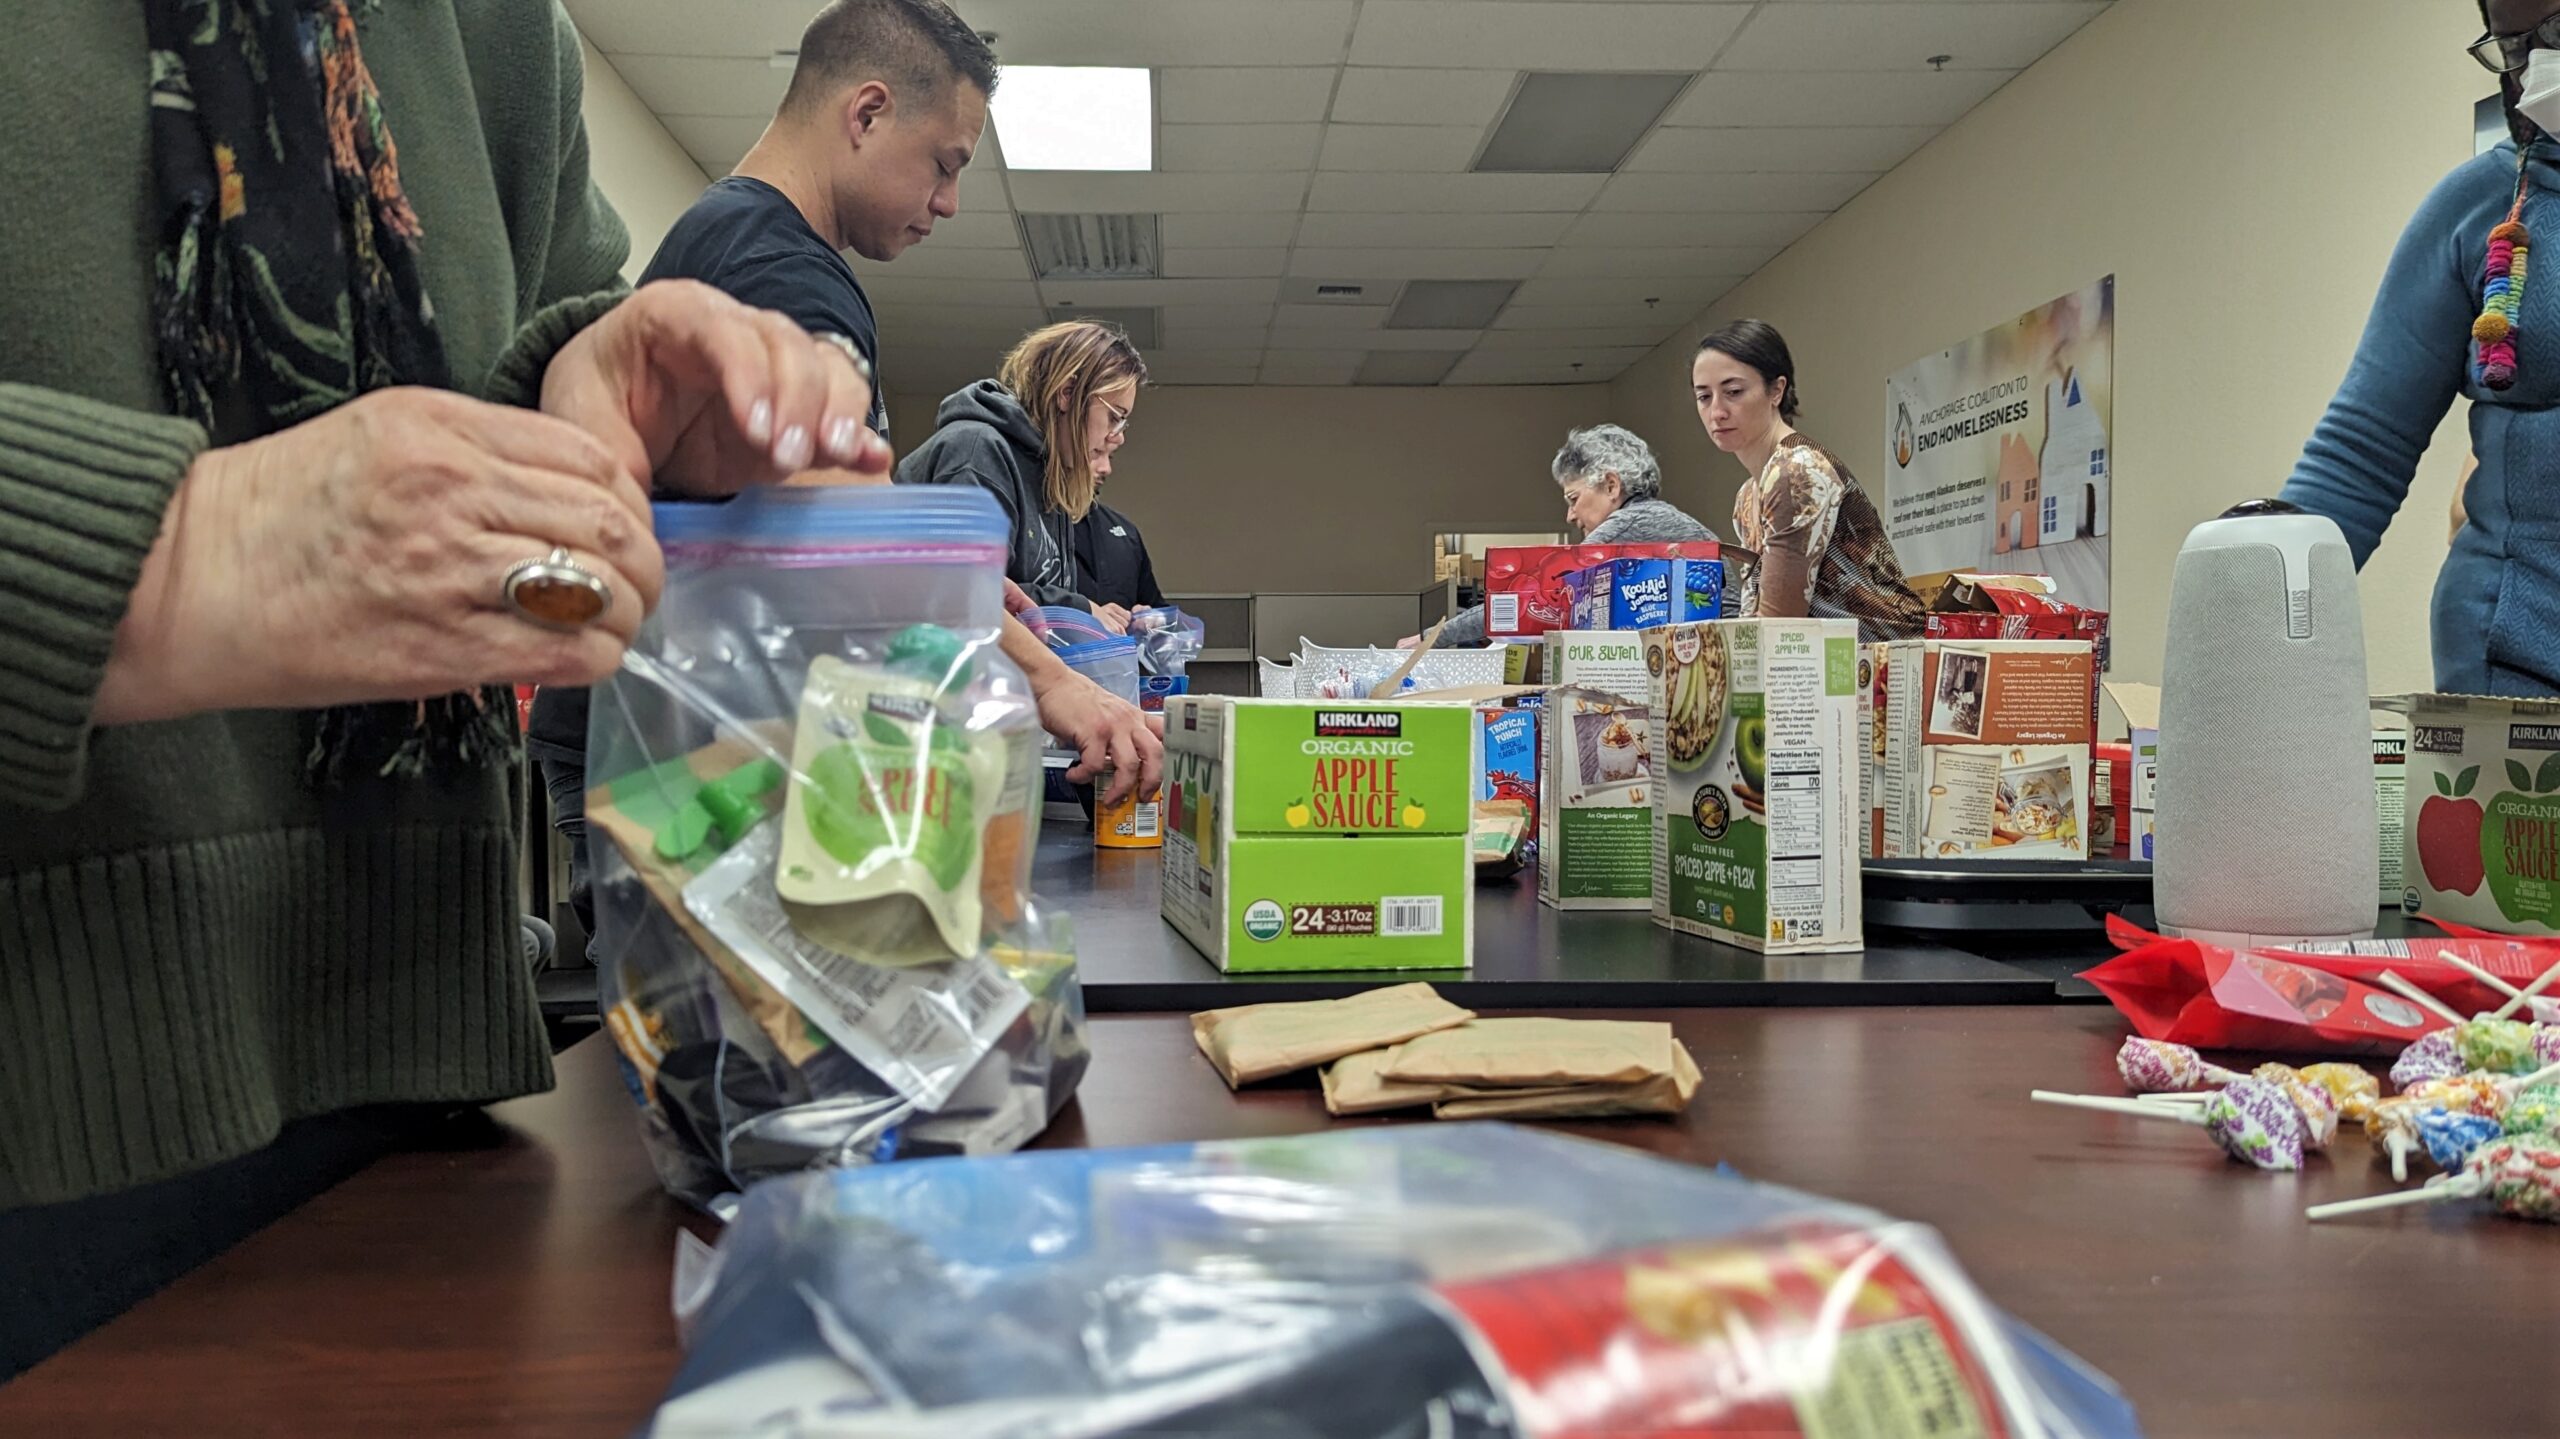 volunteers put together baggies of personal hygiene products and snacks